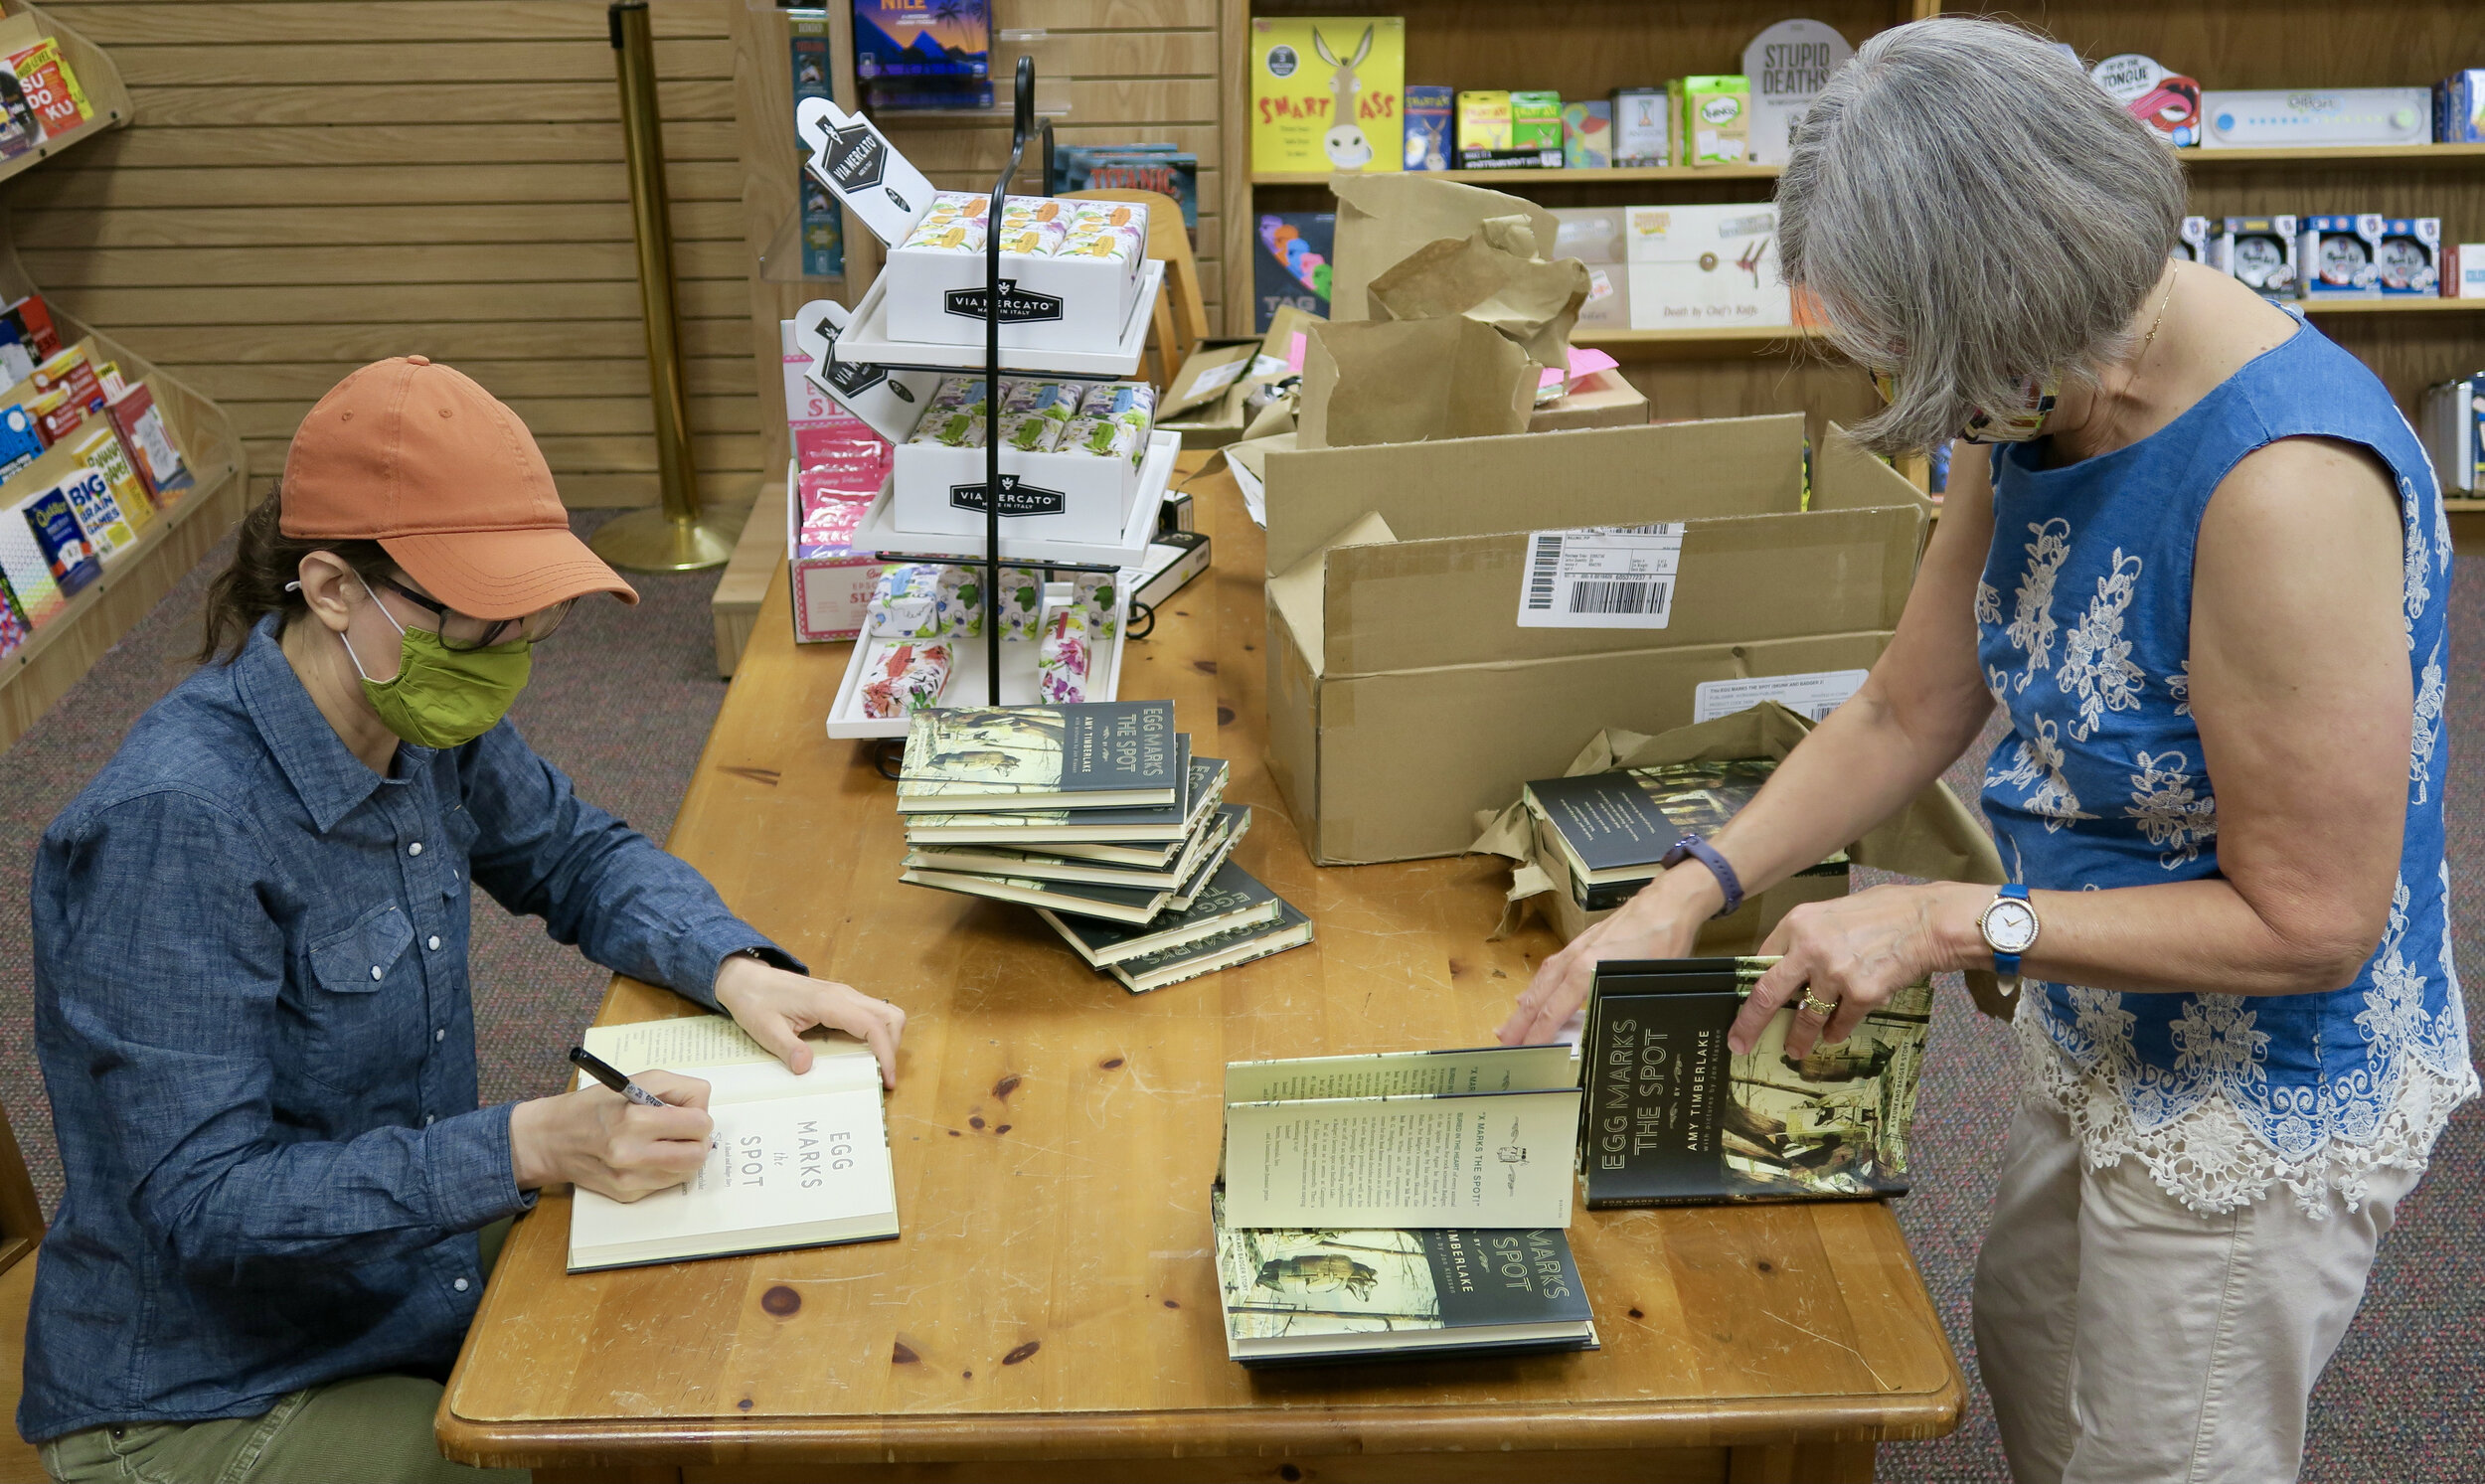 Bookseller Anne Swanson helped! Thank you, Anne!